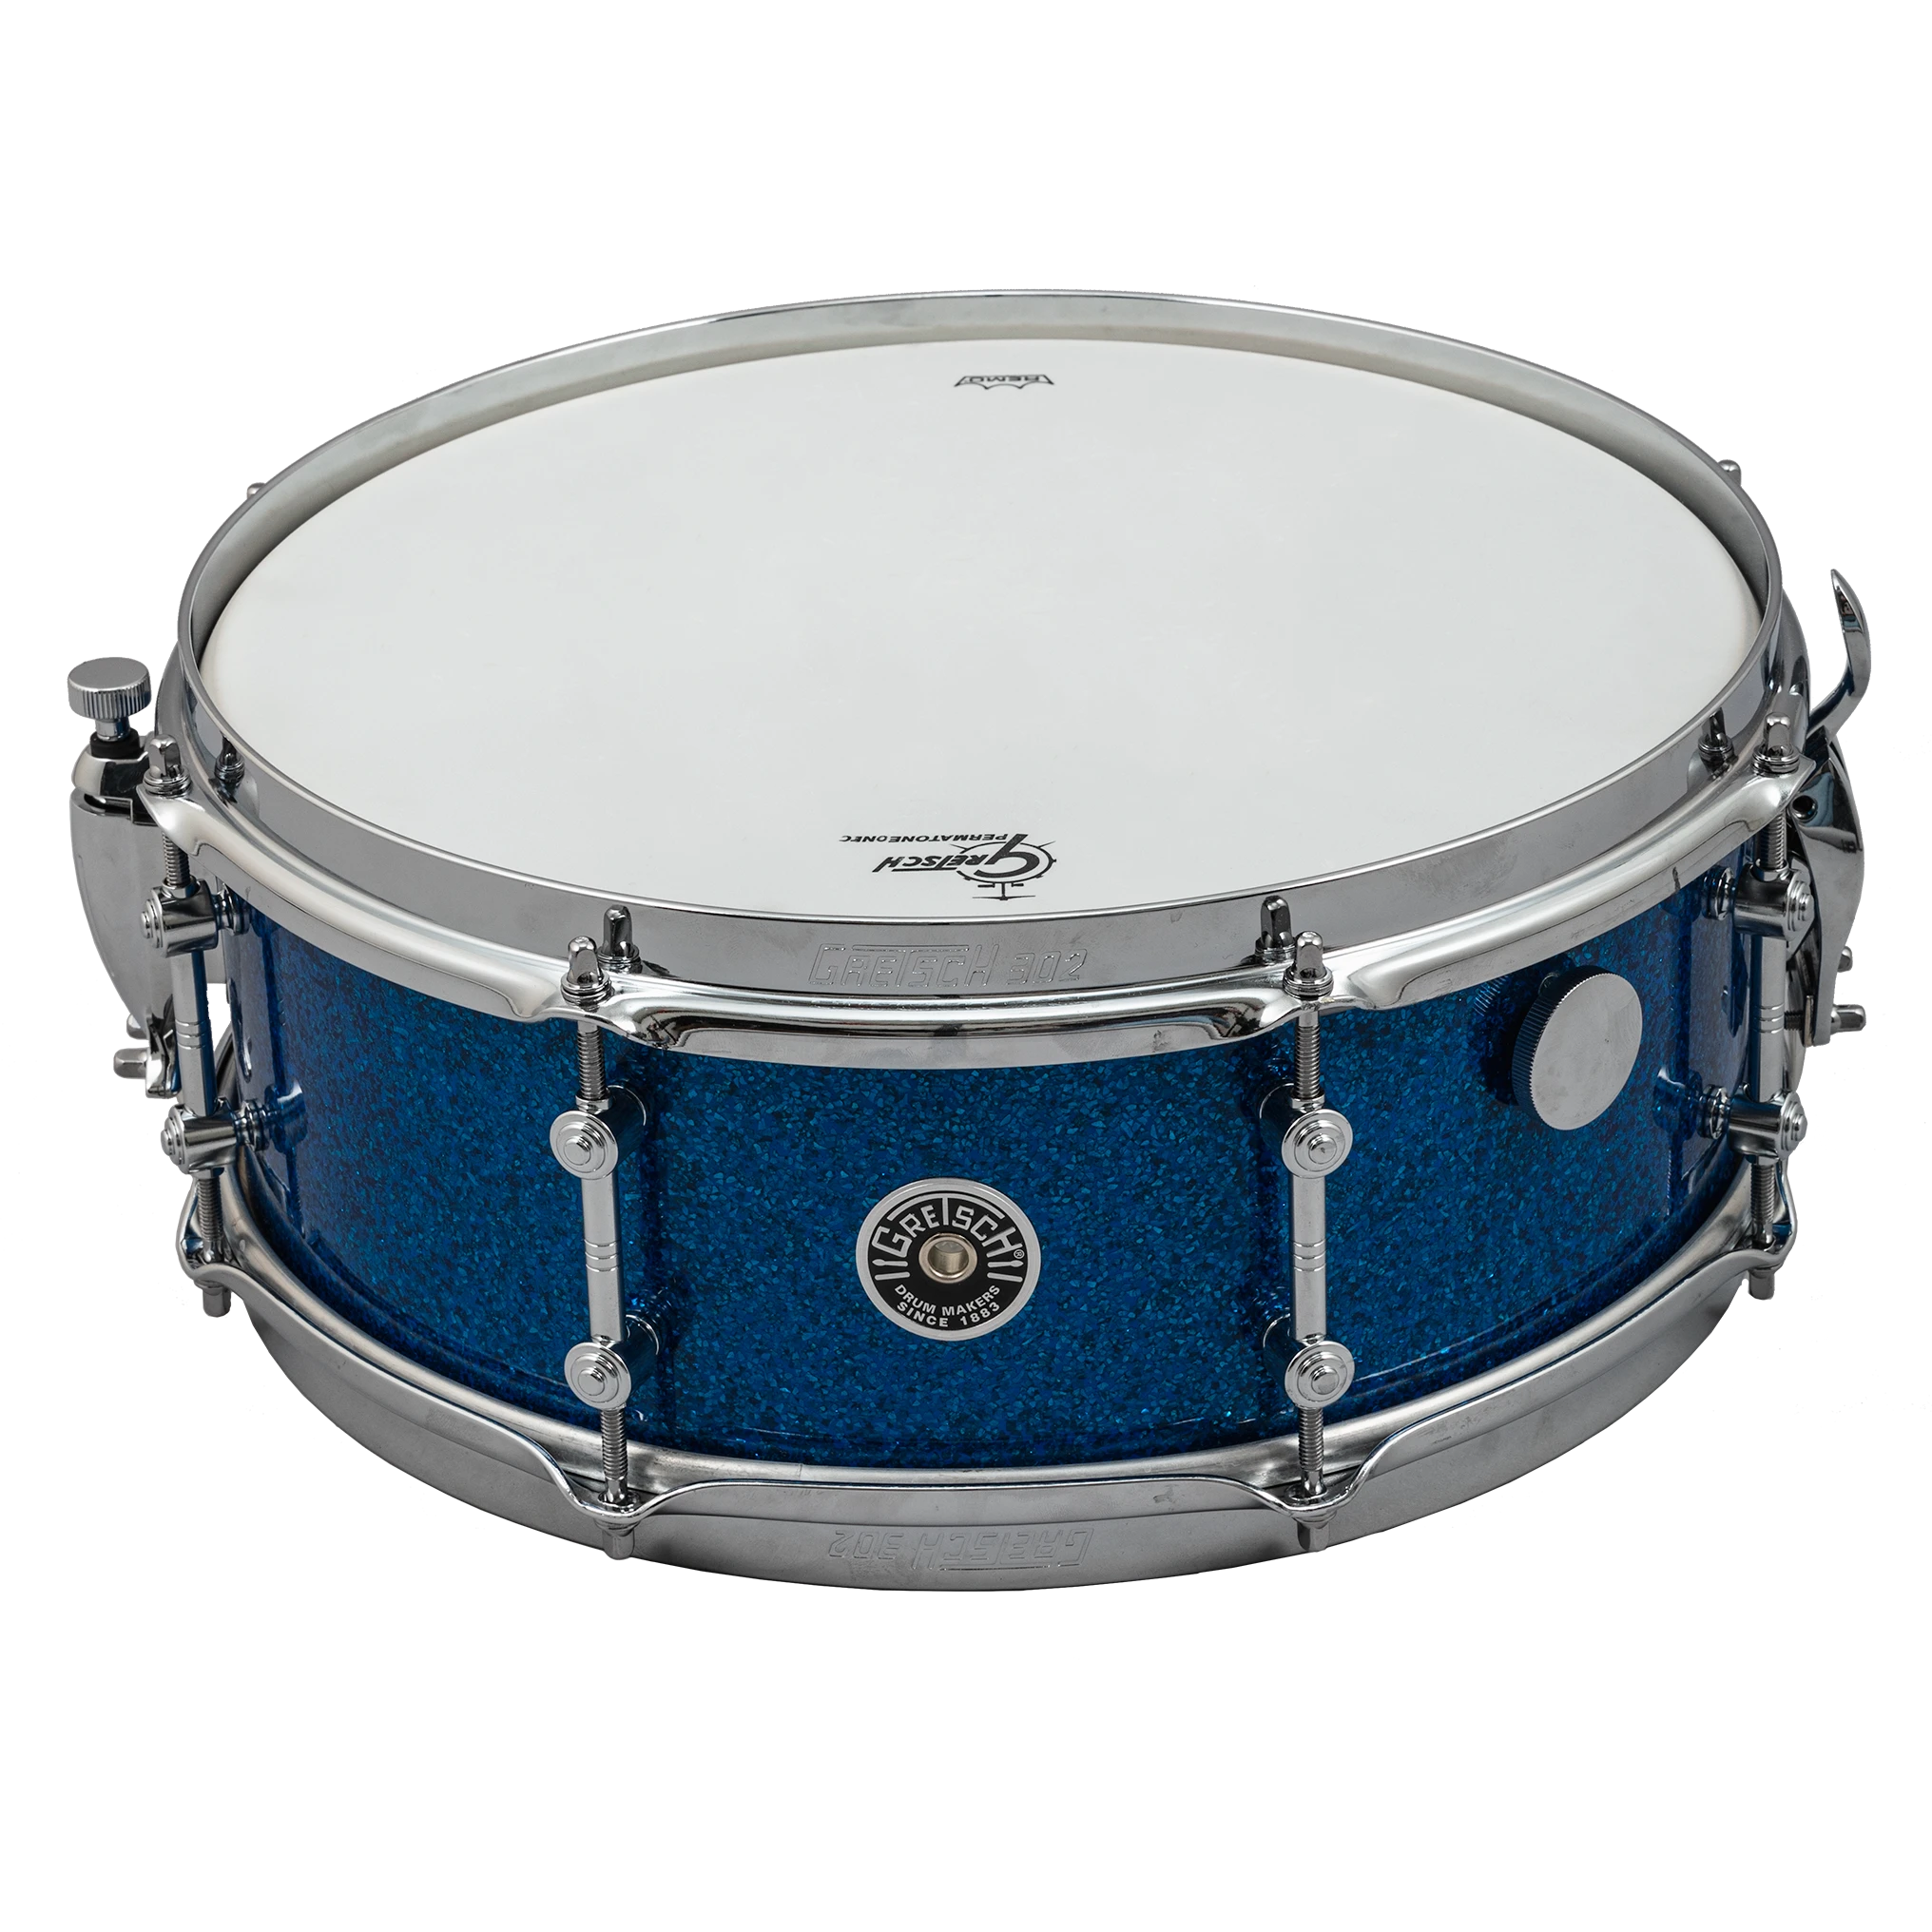 Gretsch Mike Johnston Brooklyn Standard 14x5,5 Snare Drum Mike Johnston - Limited Edition Blue Glass